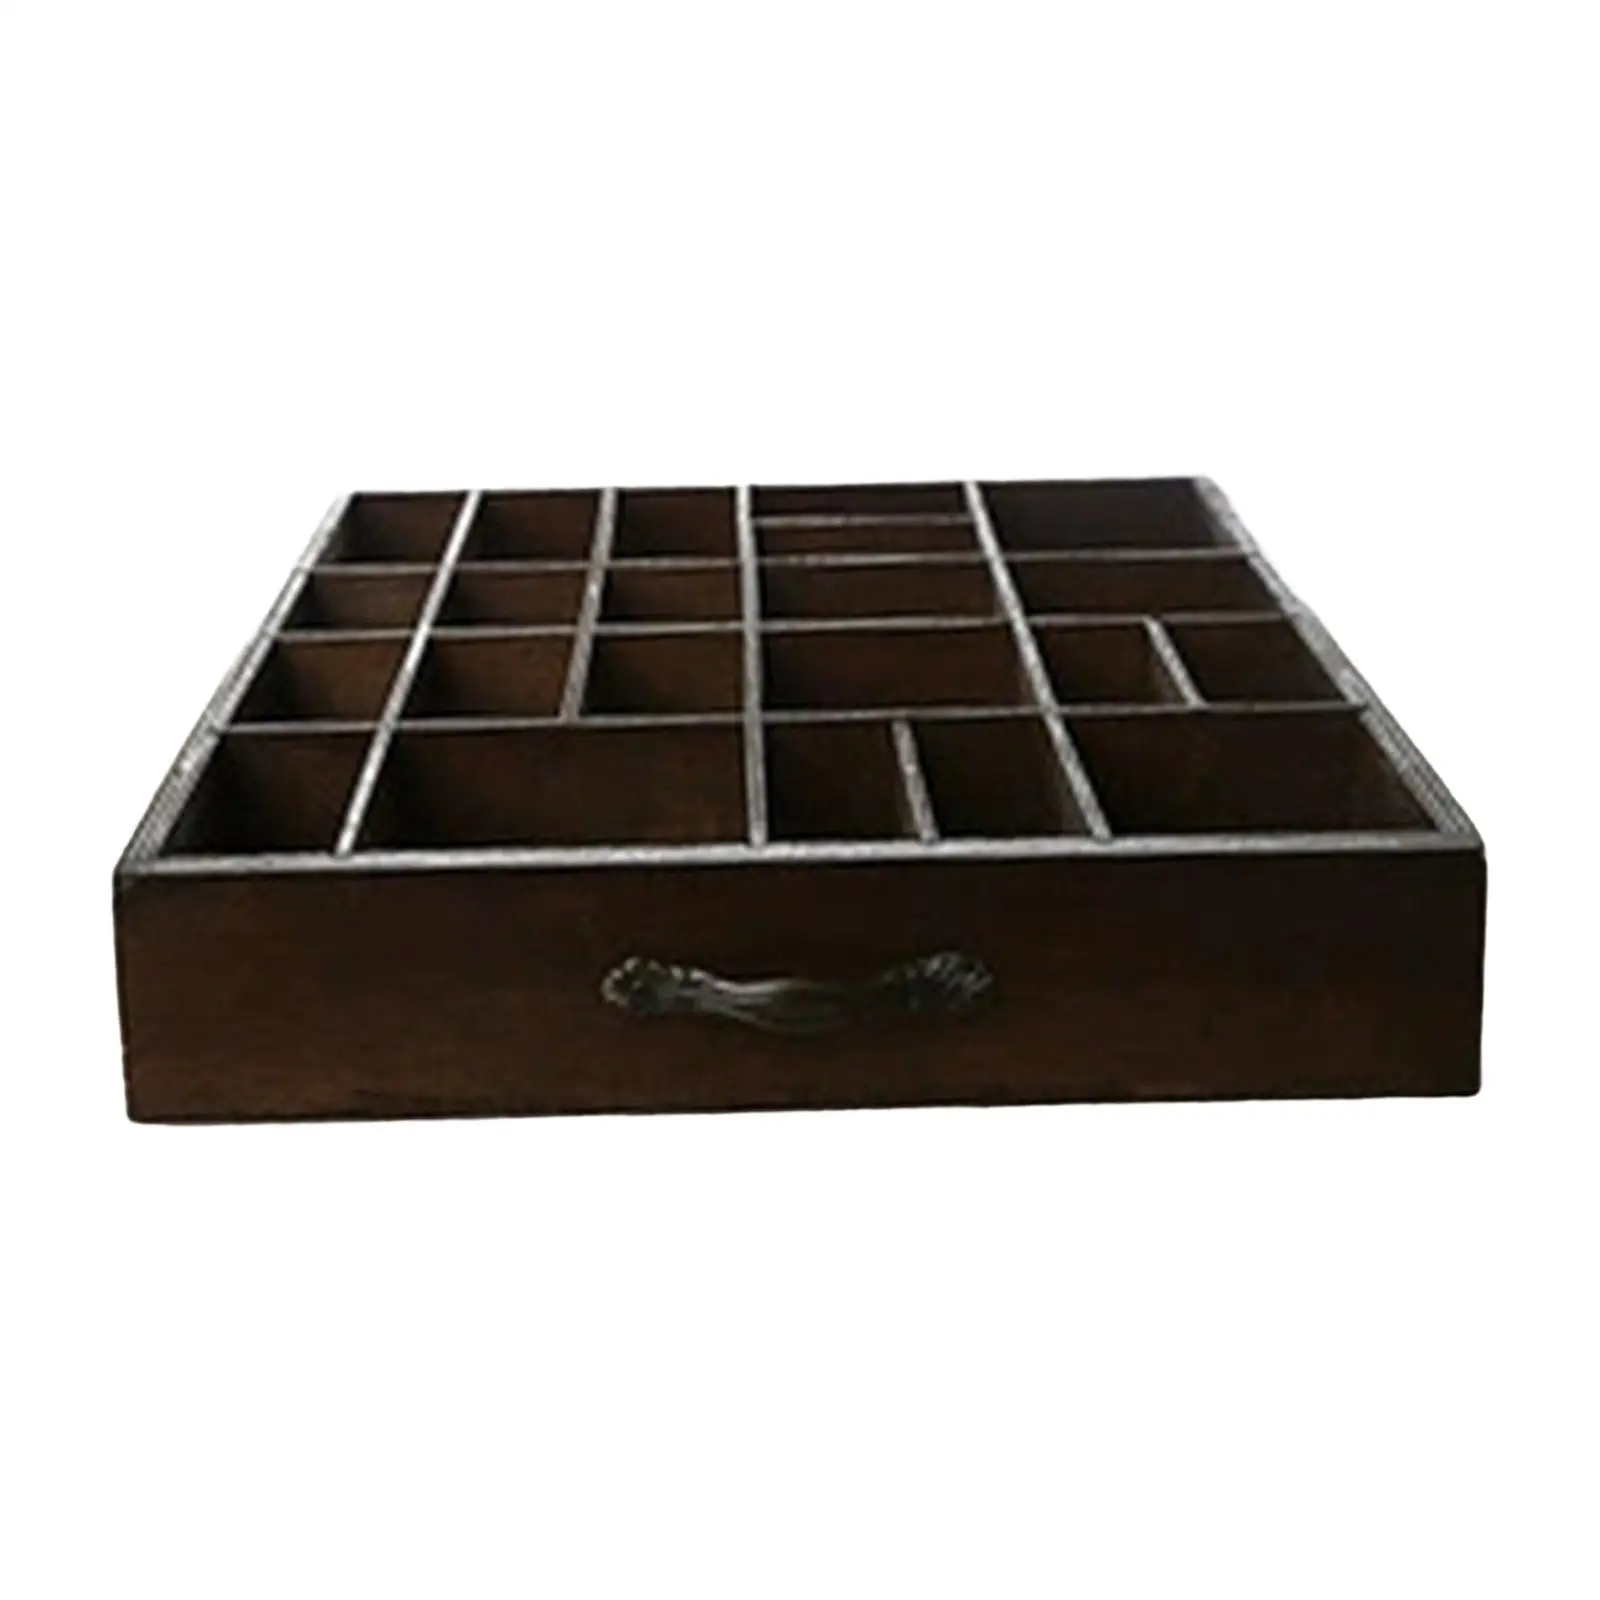 Desk Organizer with Dividers Wood Tray Box for Kitchen Cabinet Bedroom